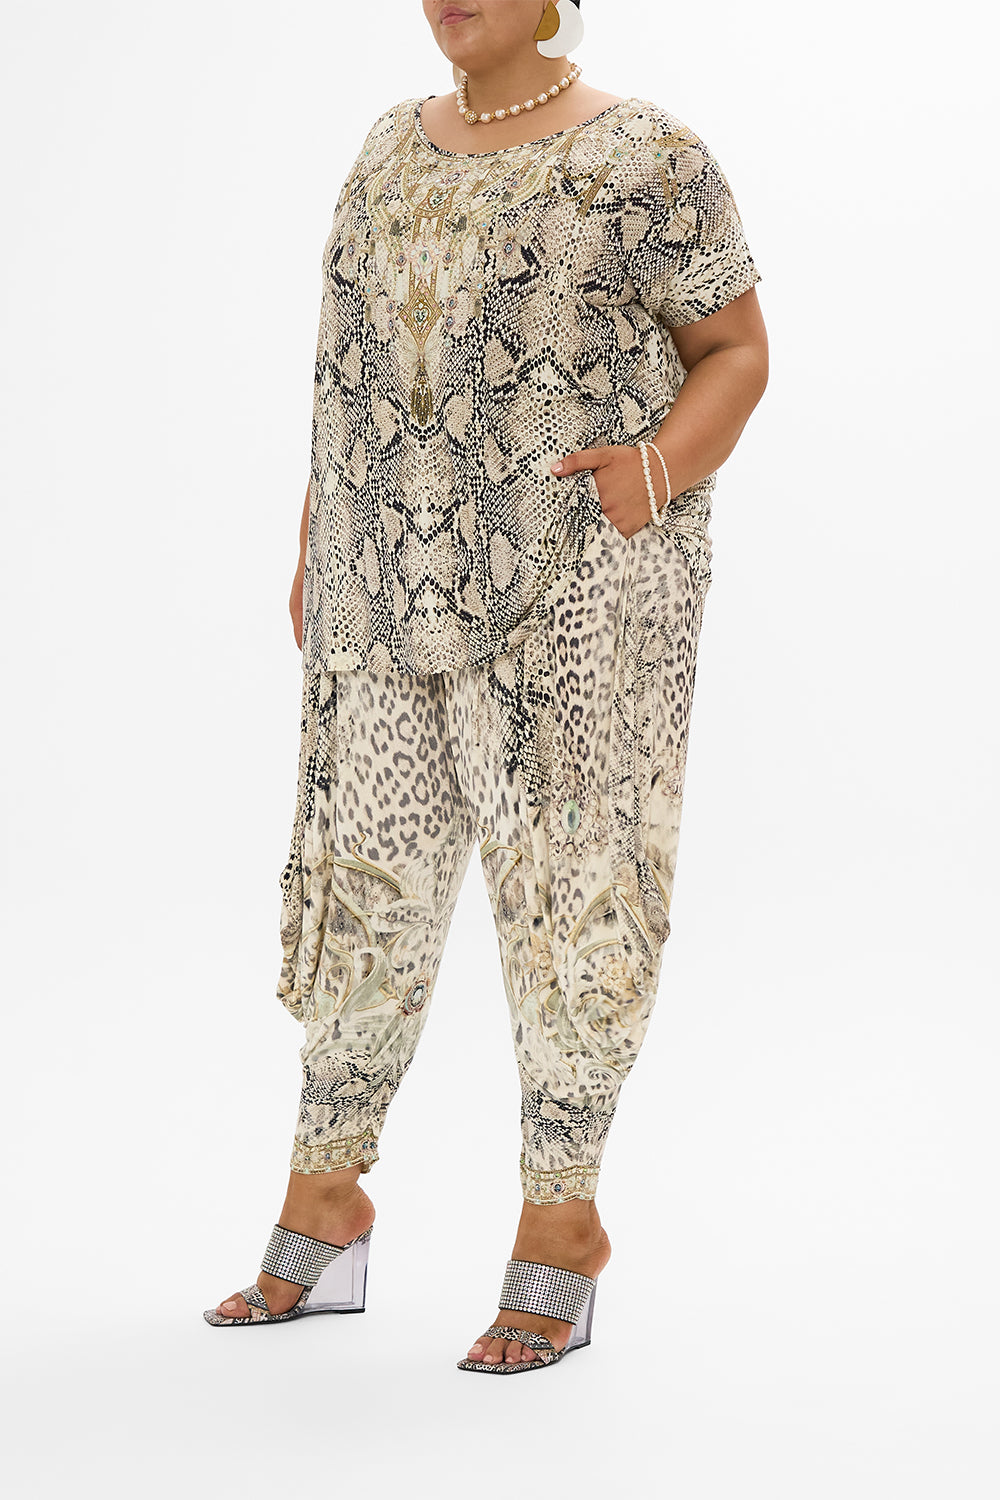 JERSEY RIB DRAPE PANT WITH POCKETS LOOKING GLASS HOUSES